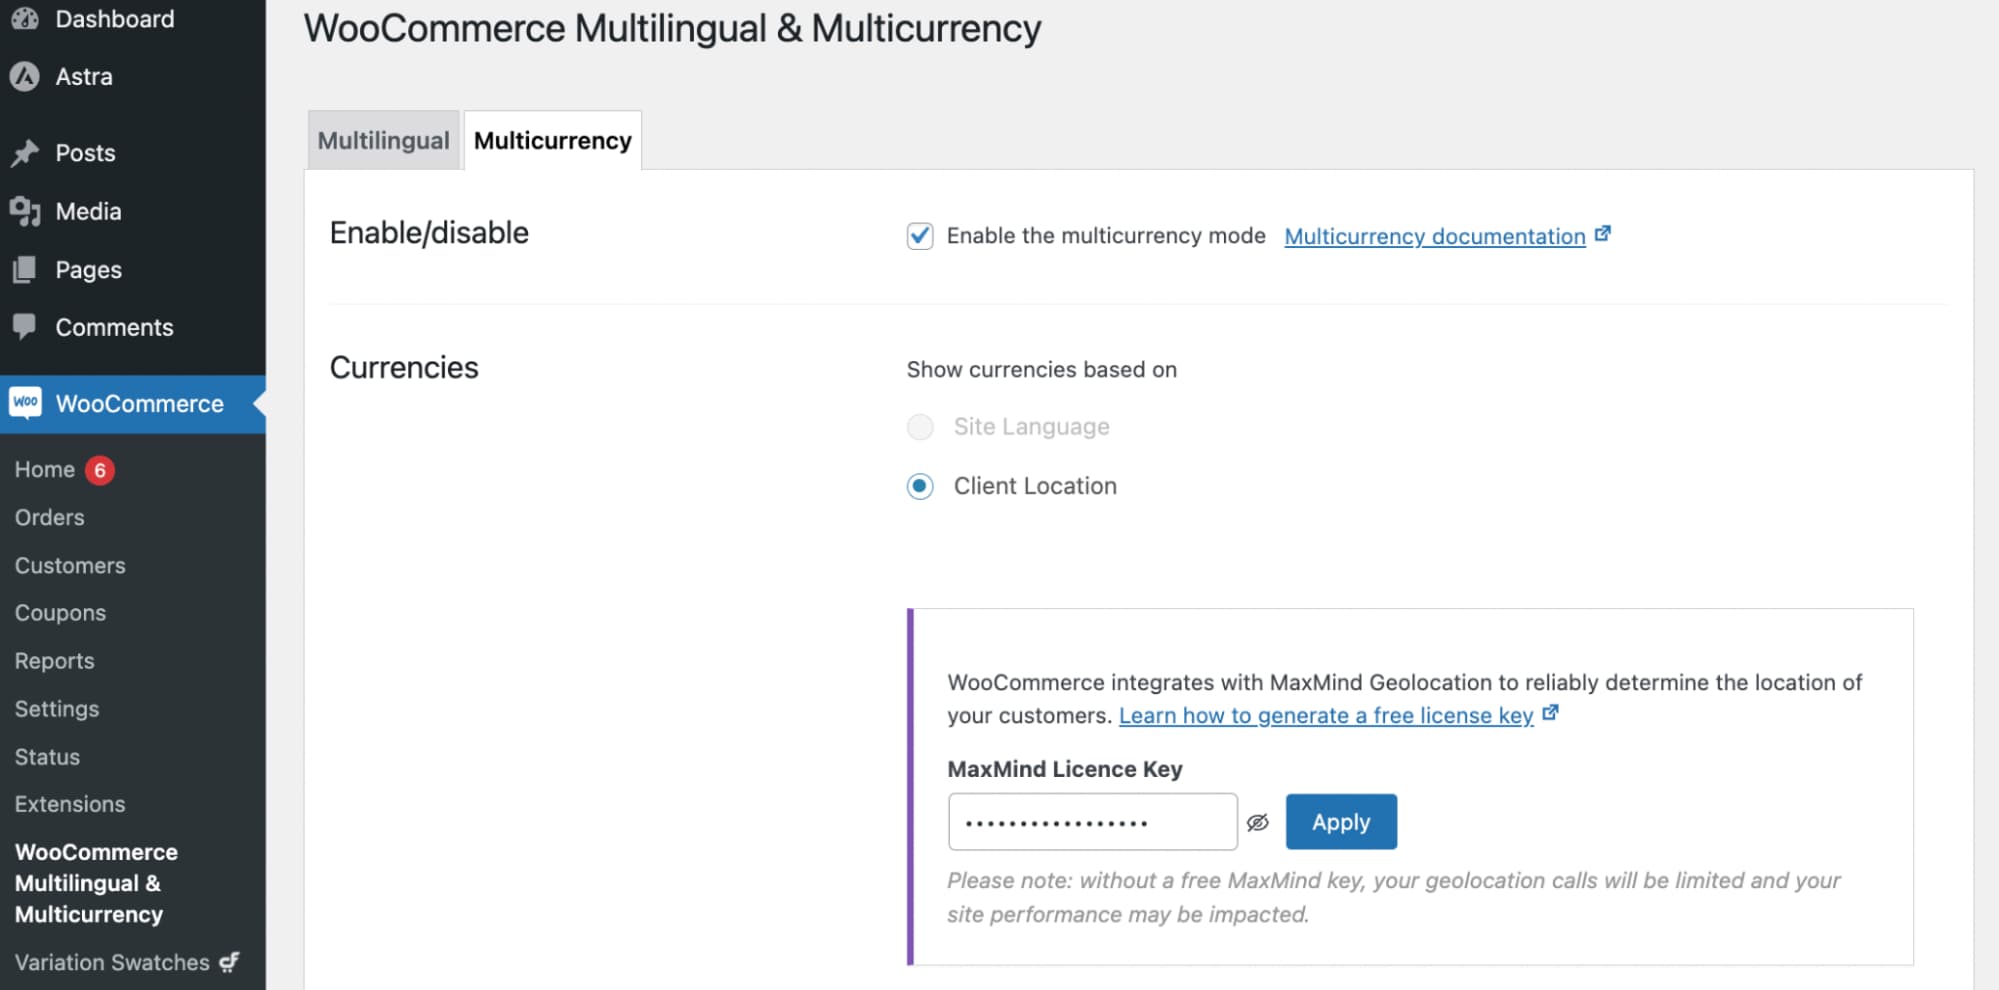 woocommerce multi-currency plugin first step demo 